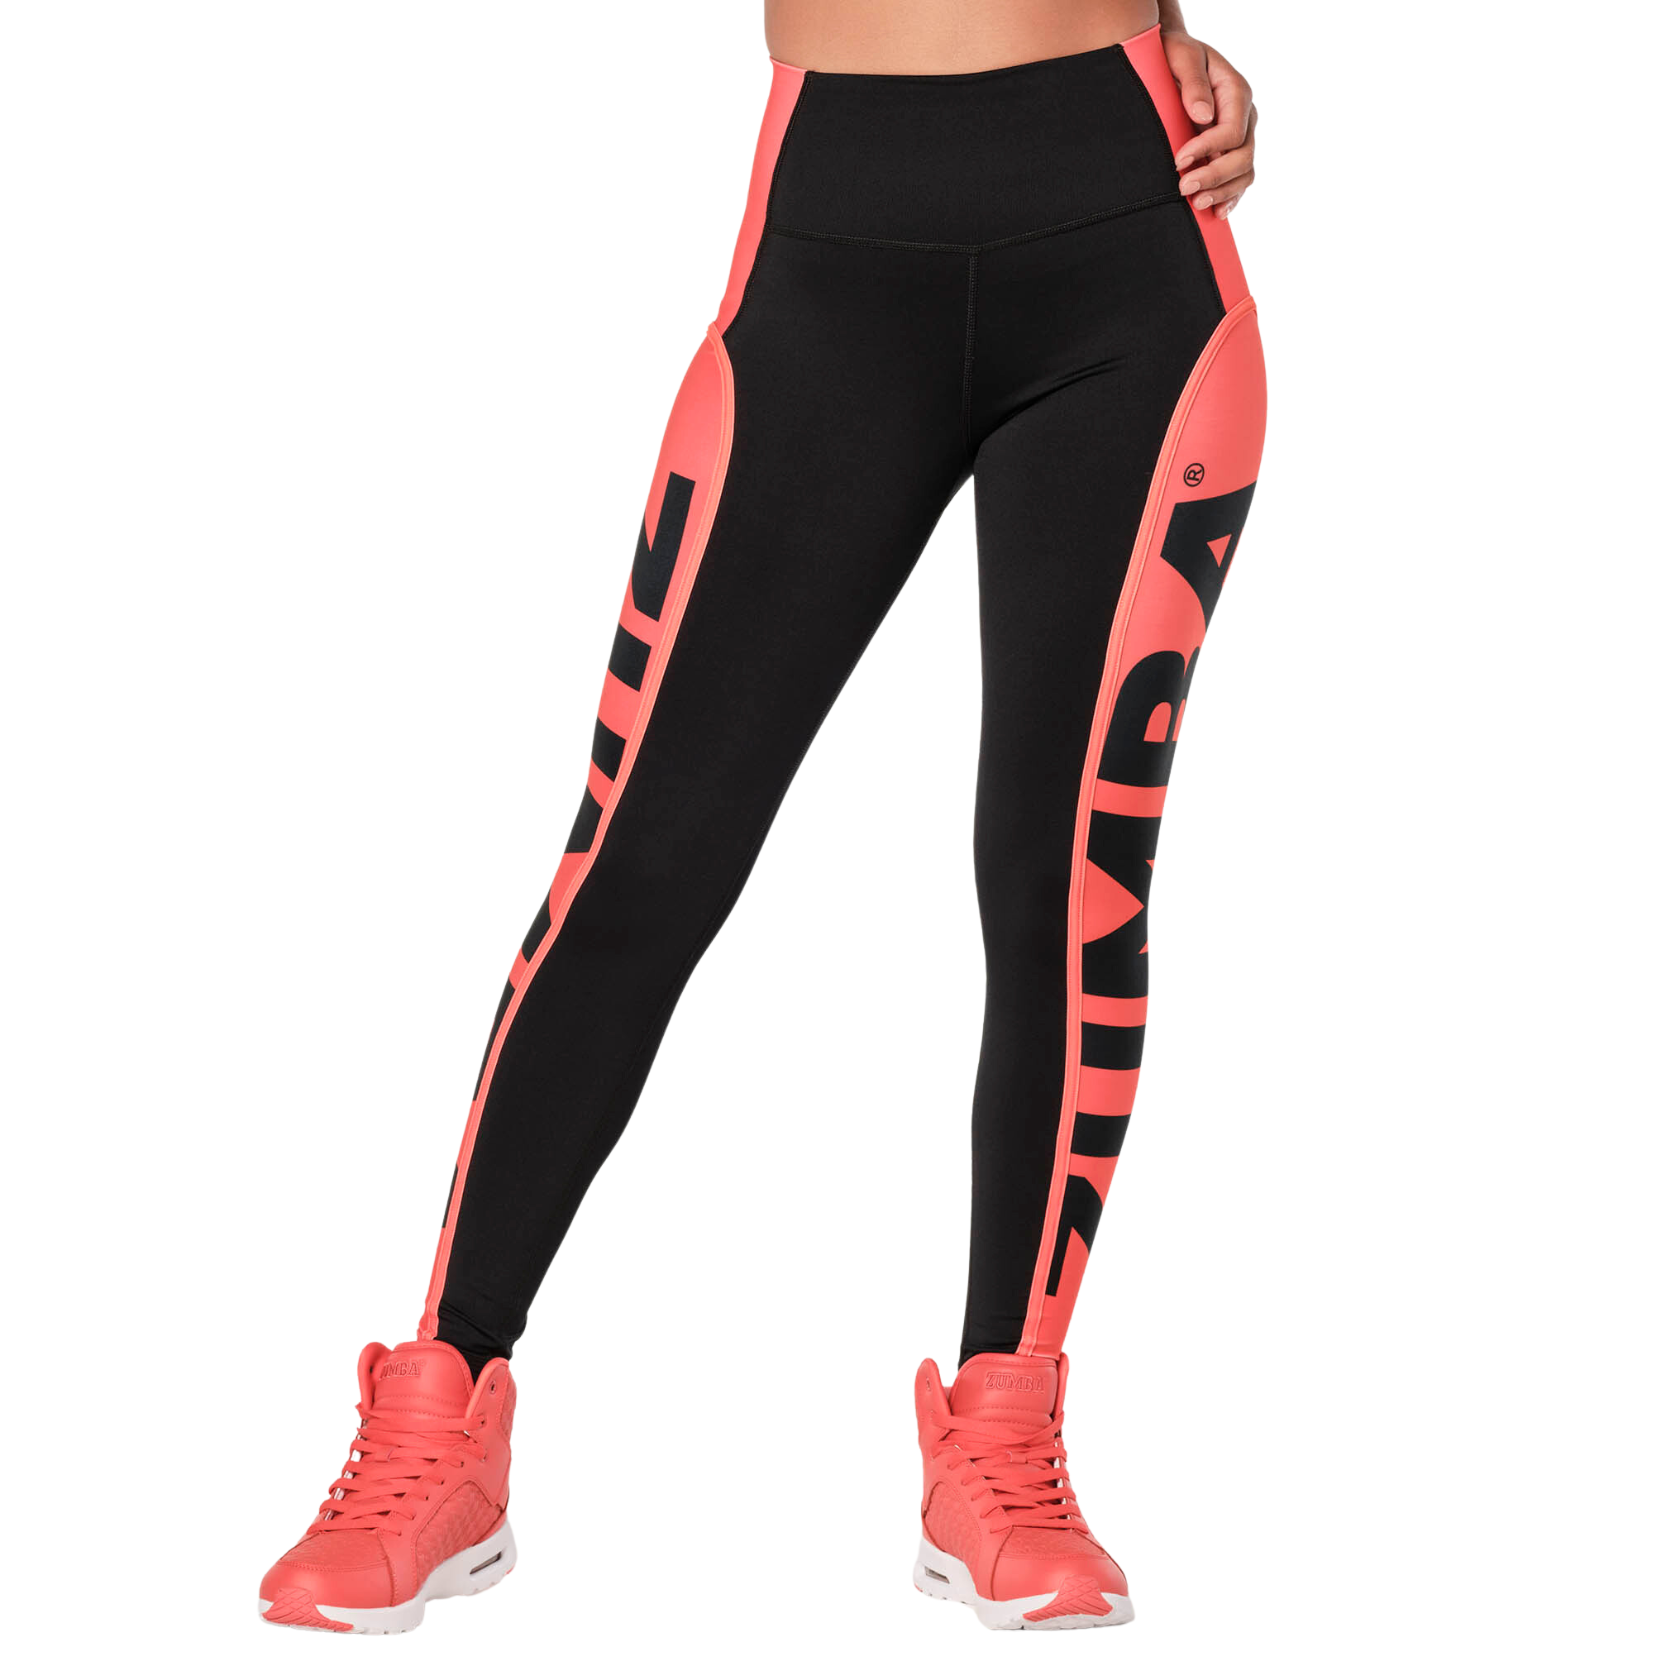 Zumba Creatives Unite High Waisted Ankle Leggings (Special Order)